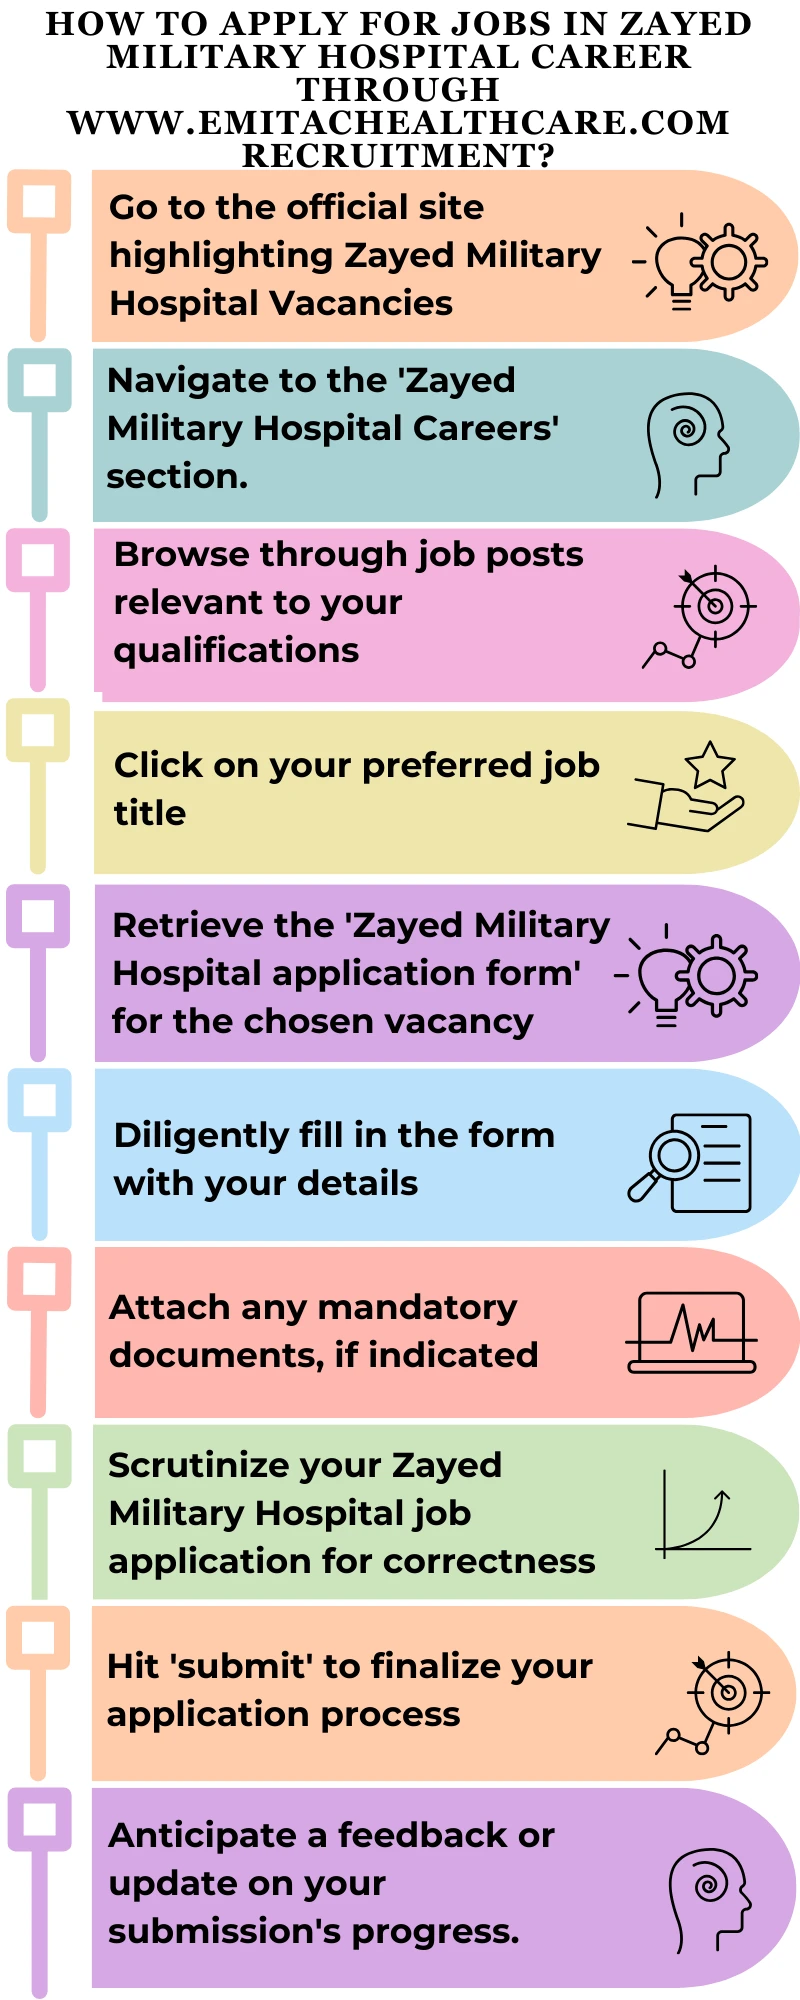 How to Apply for Jobs in Zayed Military Hospital Career through www.emitachealthcare.com recruitment?